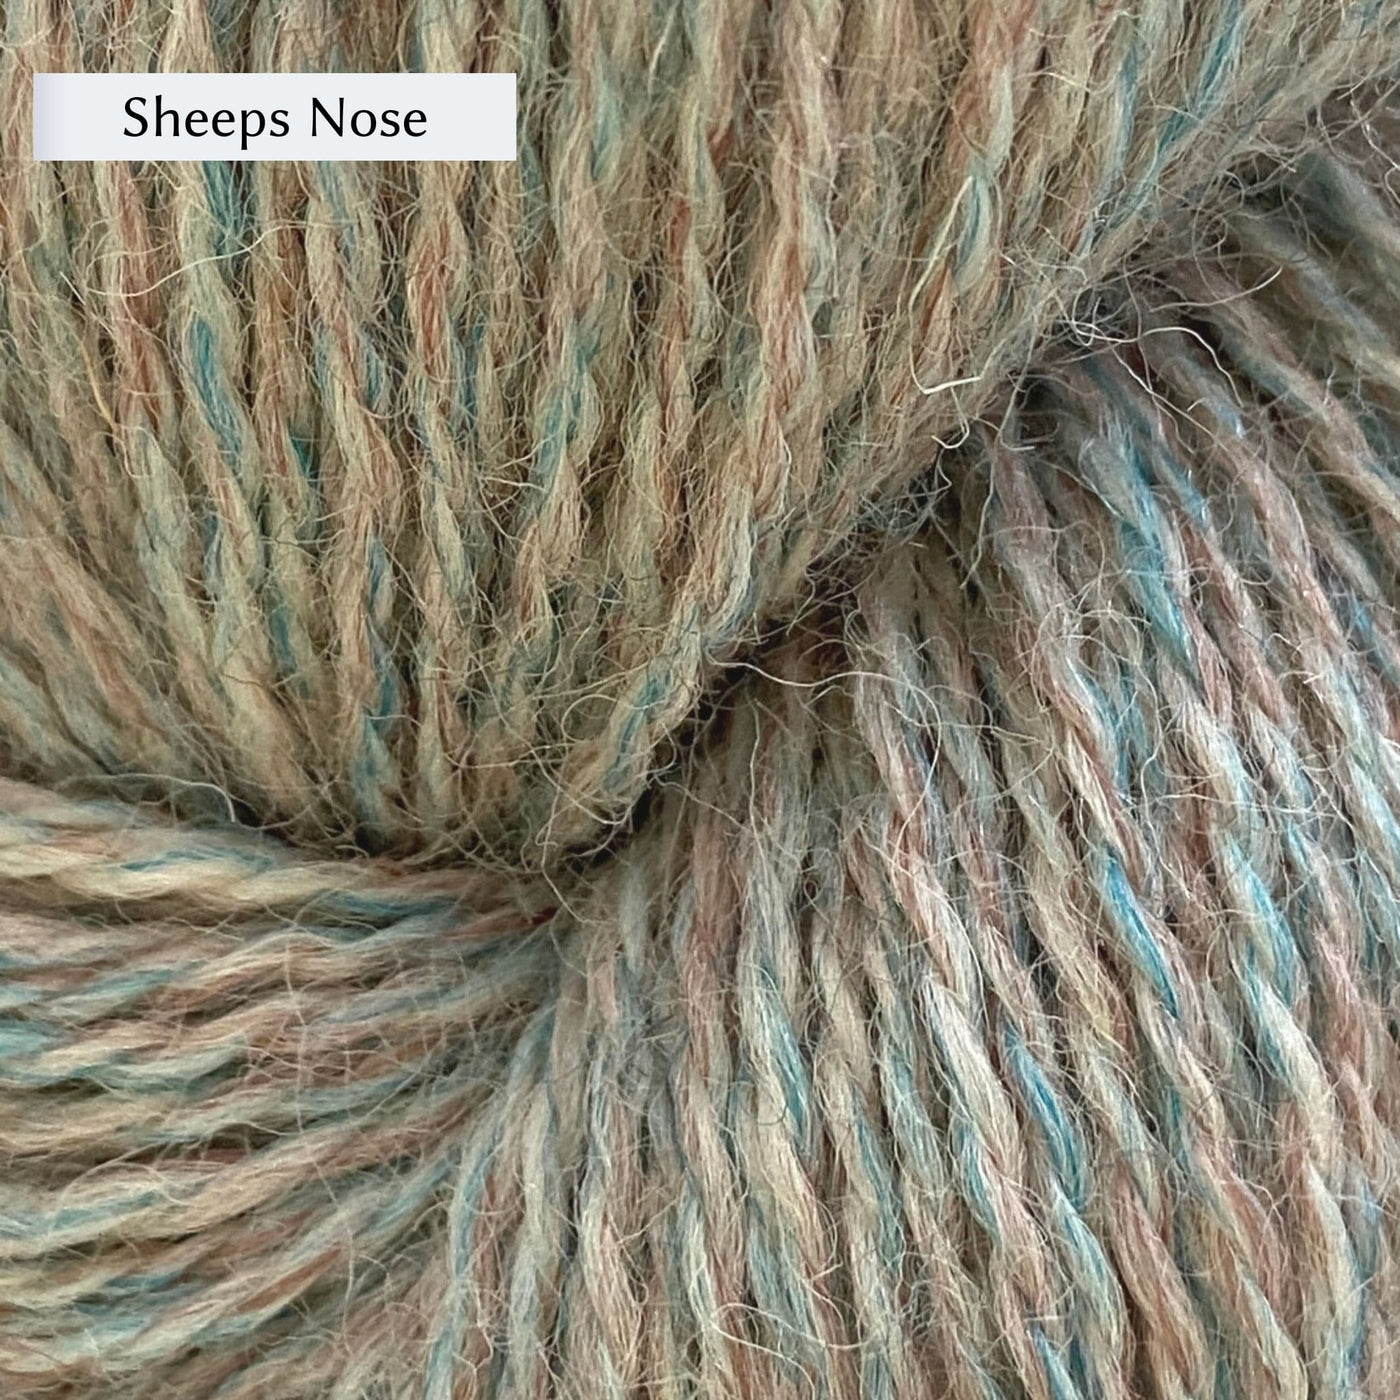 John Arbon Appledore DK, a DK weight British yarn, in color Sheeps Nose, a natural with heathering of teal and brown